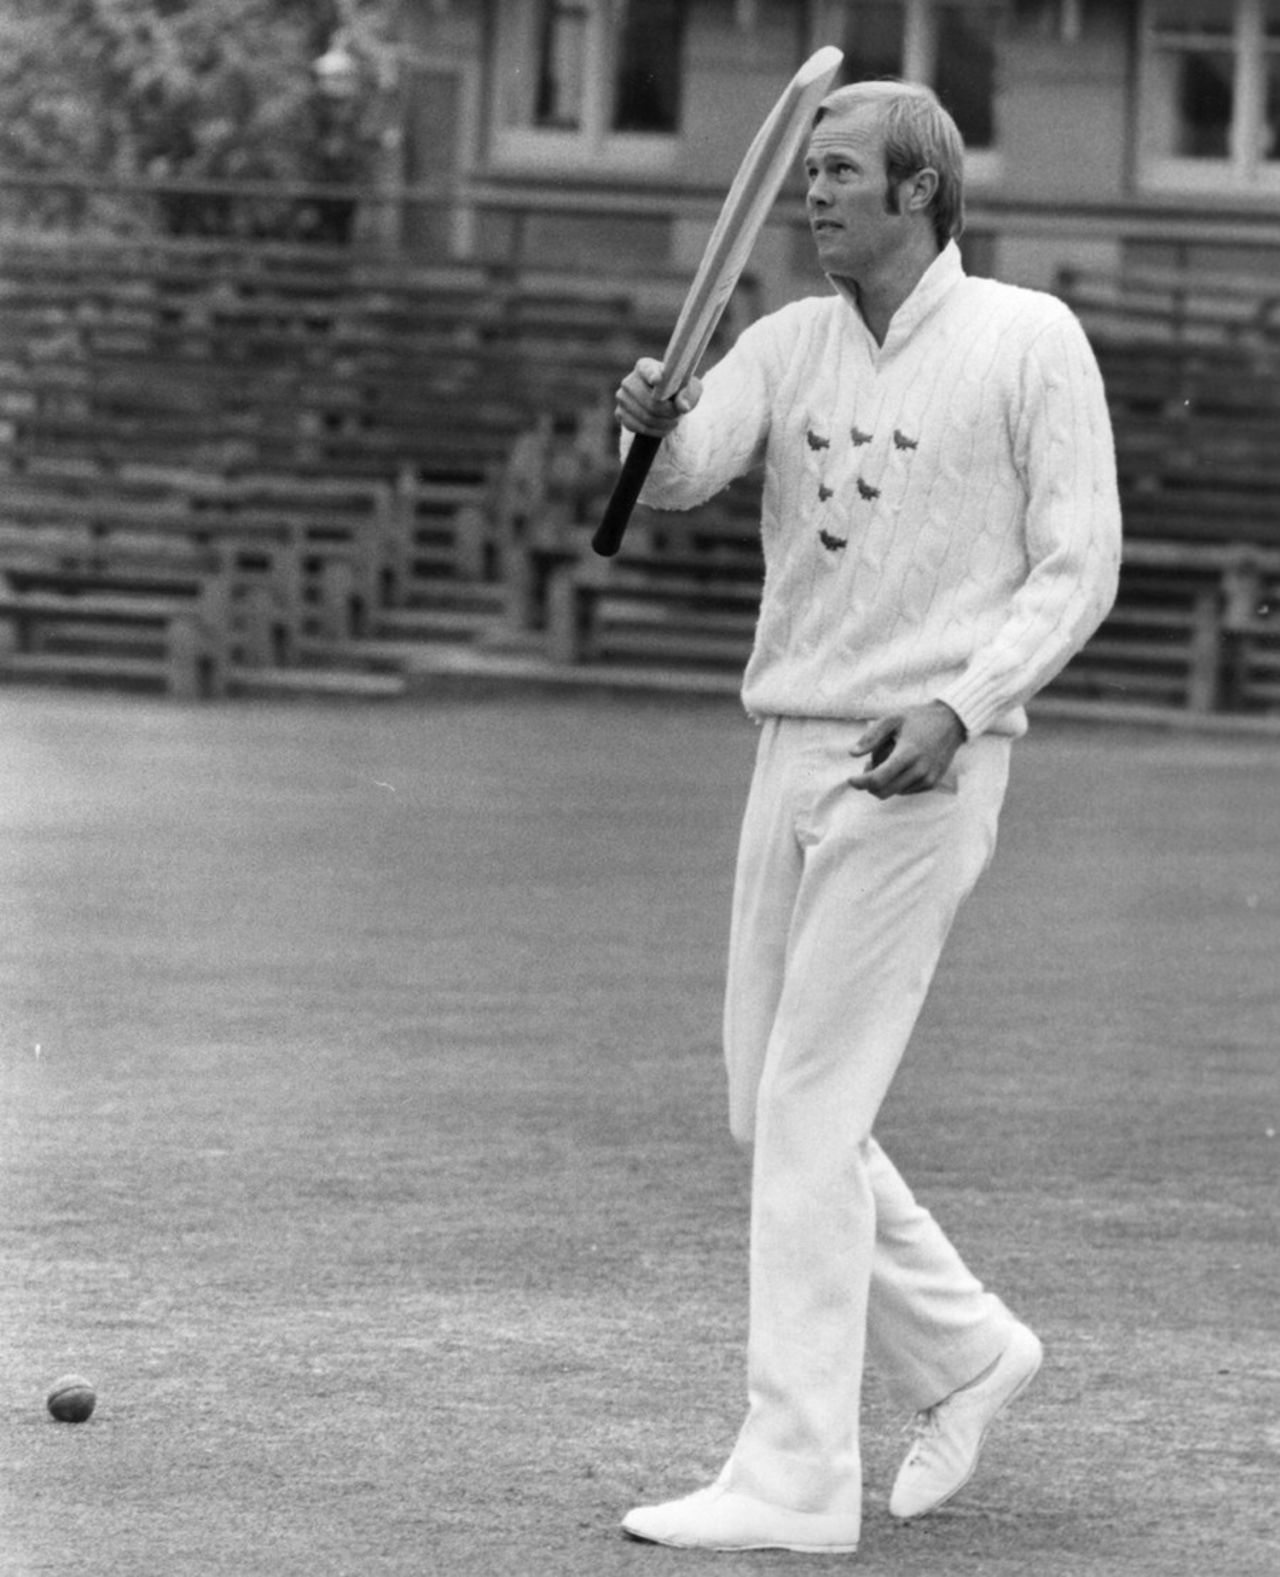 Tony Greig at a Sussex training session, April 22, 1974